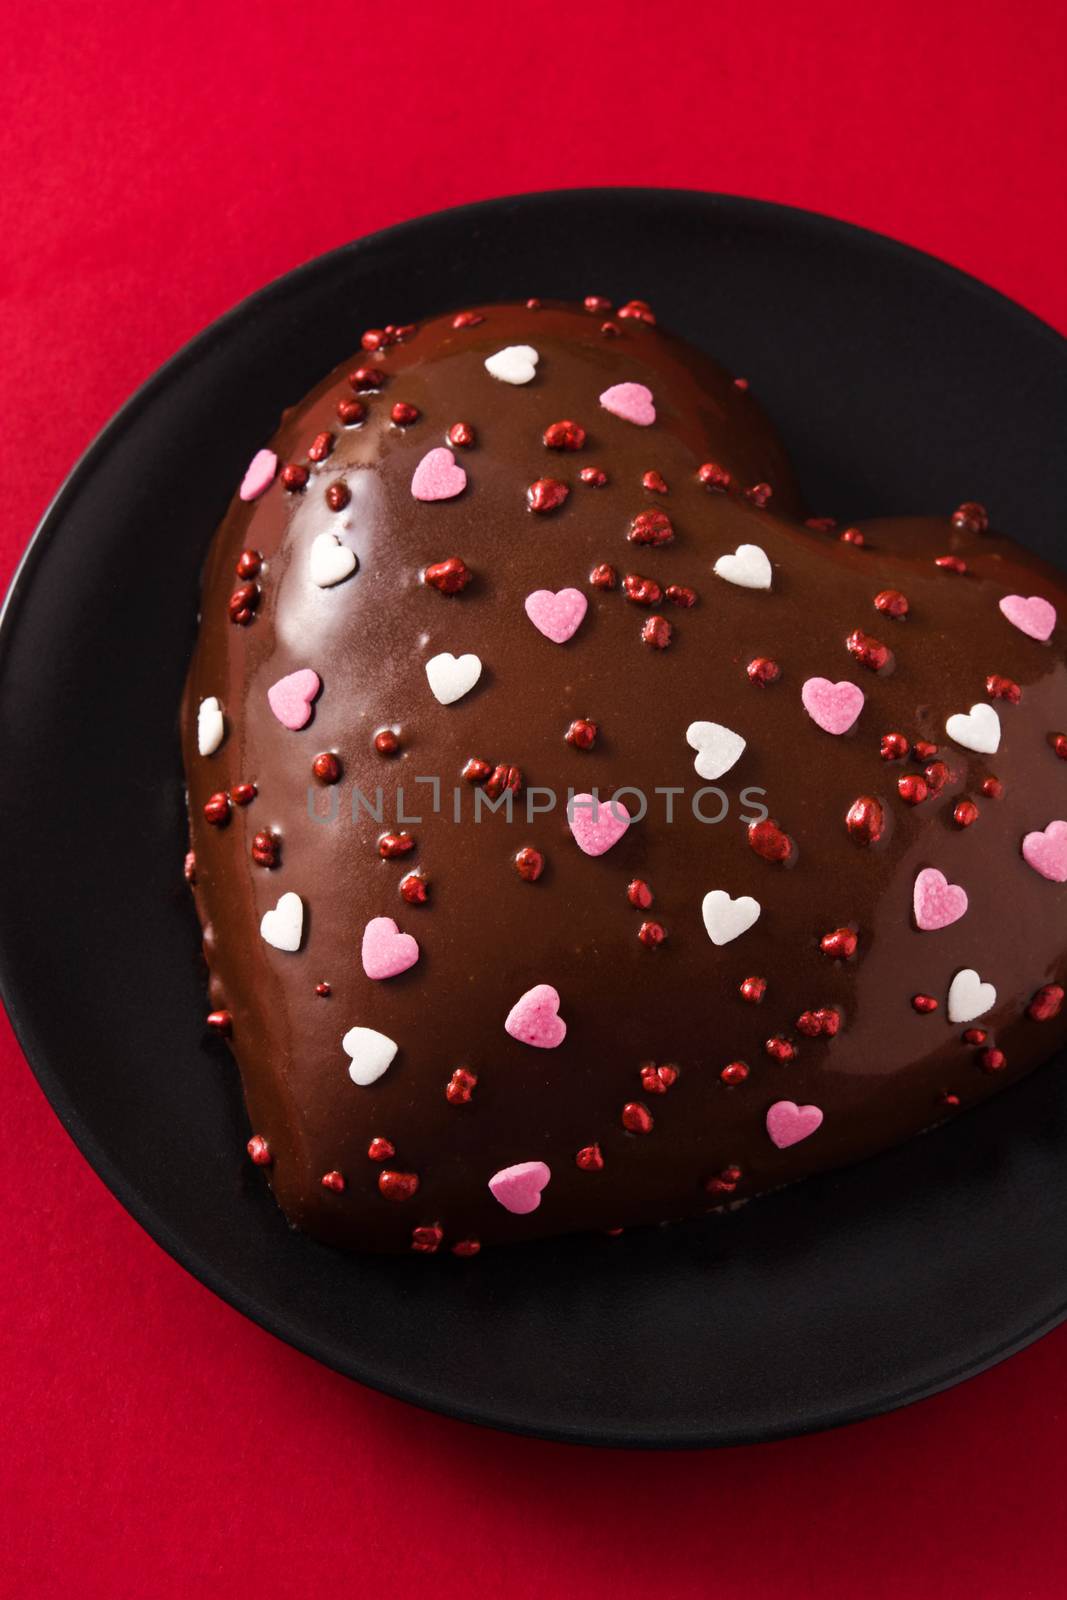 Heart shaped cake and red rose for Valentine's Day or mother's d by chandlervid85